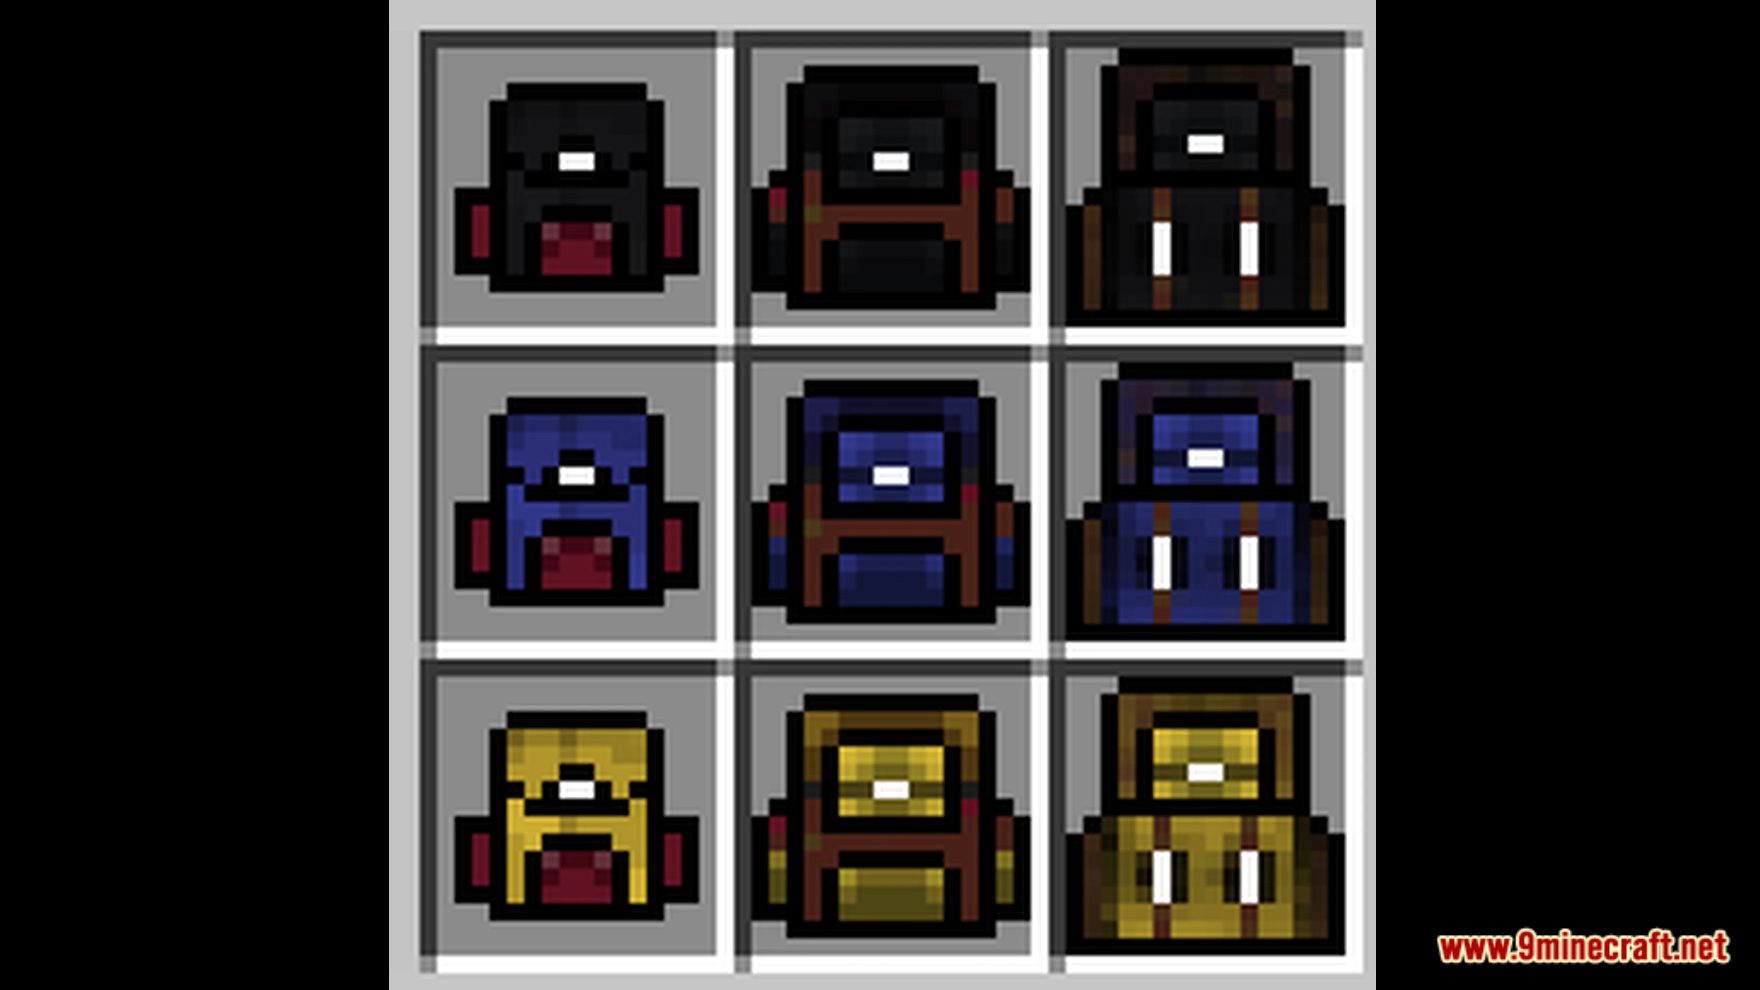 Upgradable Backpack Data Pack (1.20.6, 1.20.1) - Carry World On Shoulders 9